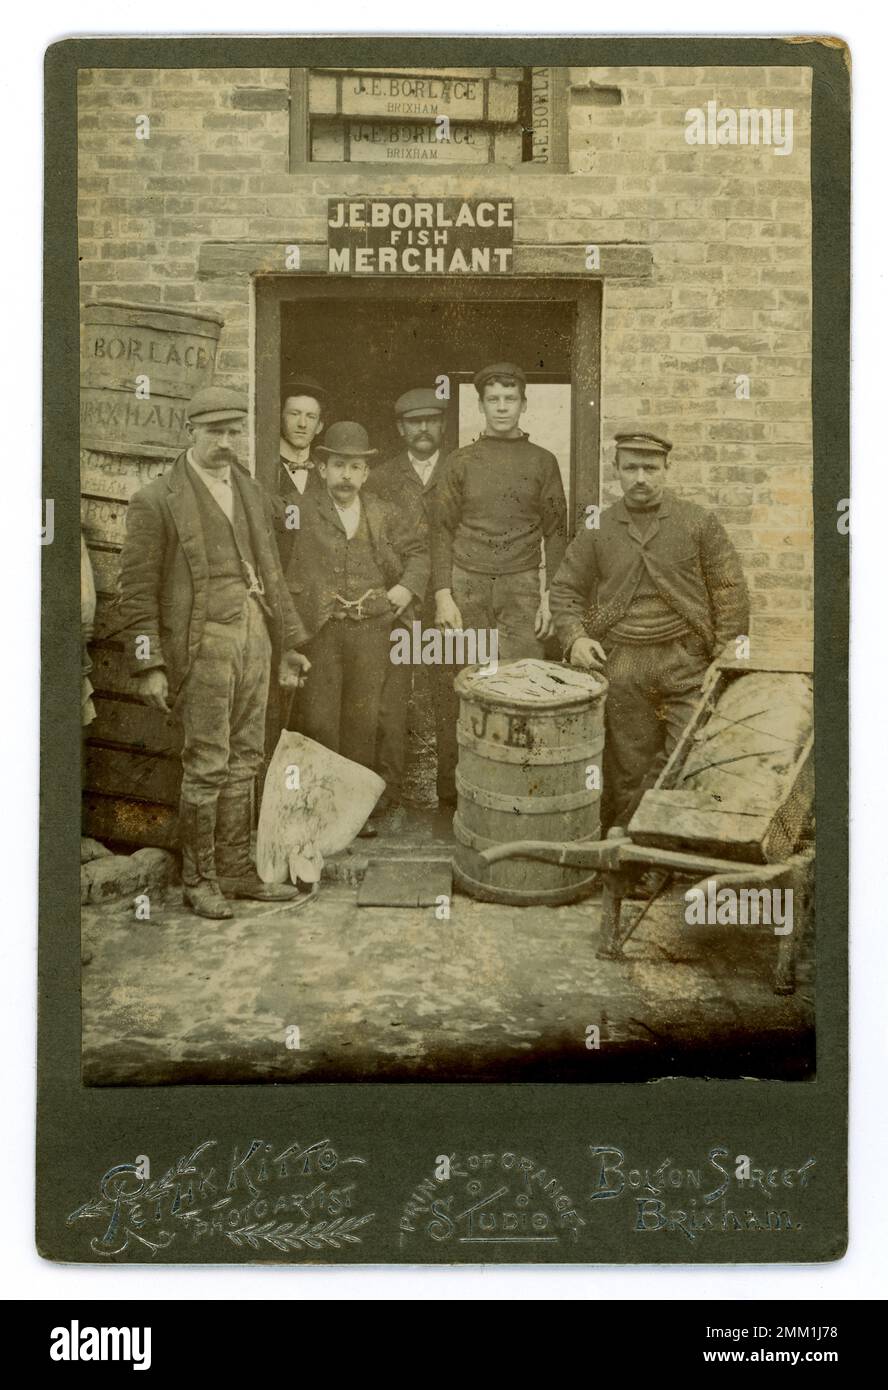 Original Victorian cabinet card cards of group of fishermen / traders / porters, characters / characterful,  outside the fish merchants of J.E. Borlace, with catch of fish, including a skate held up by one man, and a hand cart with wrapped produce, barrels advertising merchant's name, at the quayside, coastal fishing port of Brixham, Torbay district, Devon, U.K.  By photographer Peth K. Kitto (maybe Frederick K ) circa 1890's. Stock Photo